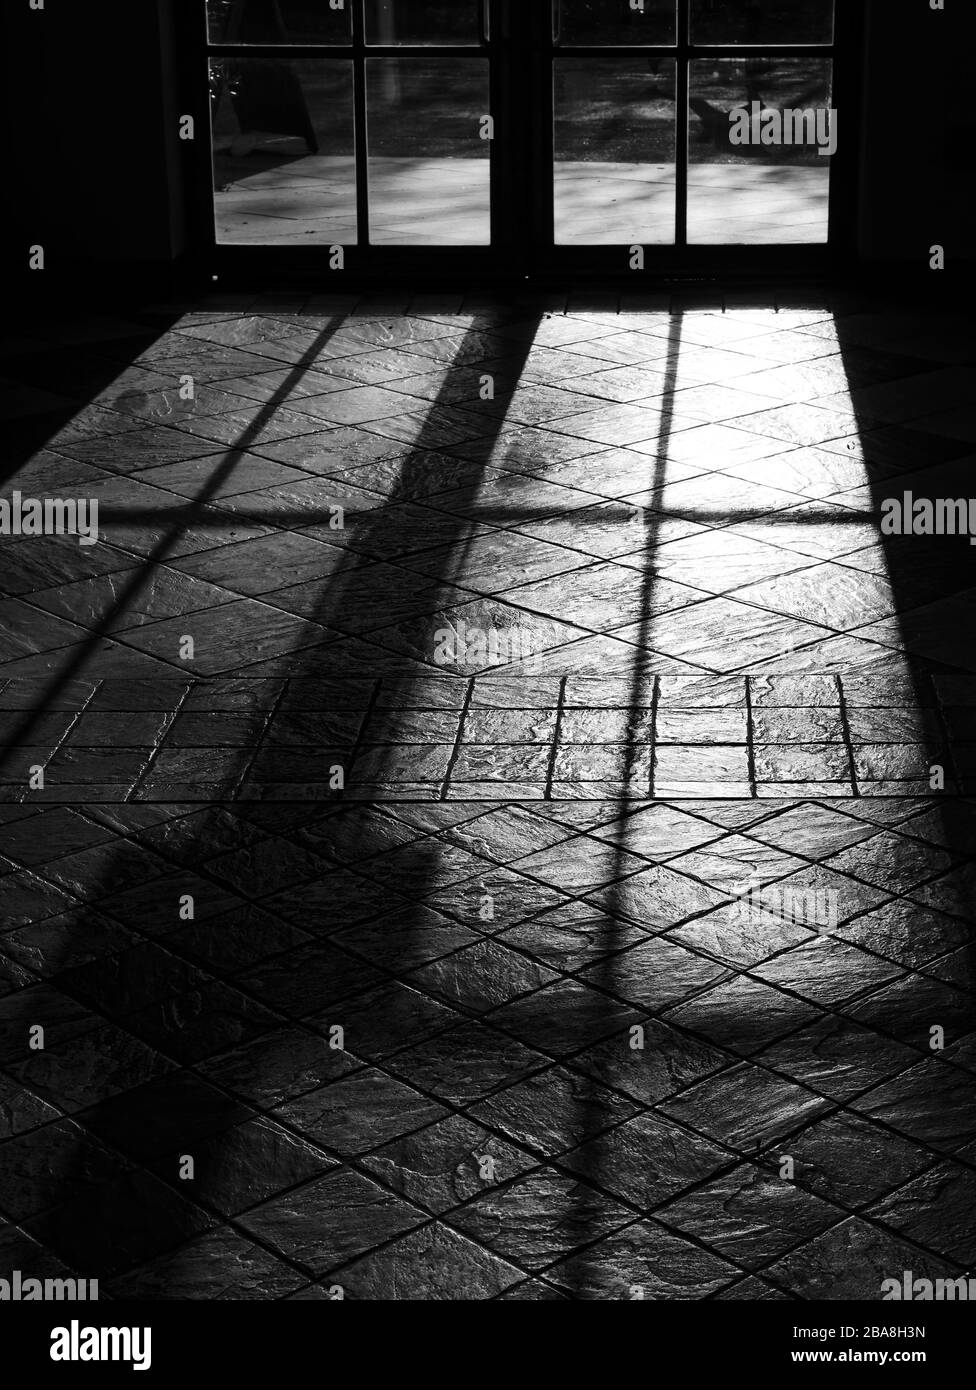 French windows casting dramatic light rays and shadow on the floor tiles. Black and white image. Stock Photo